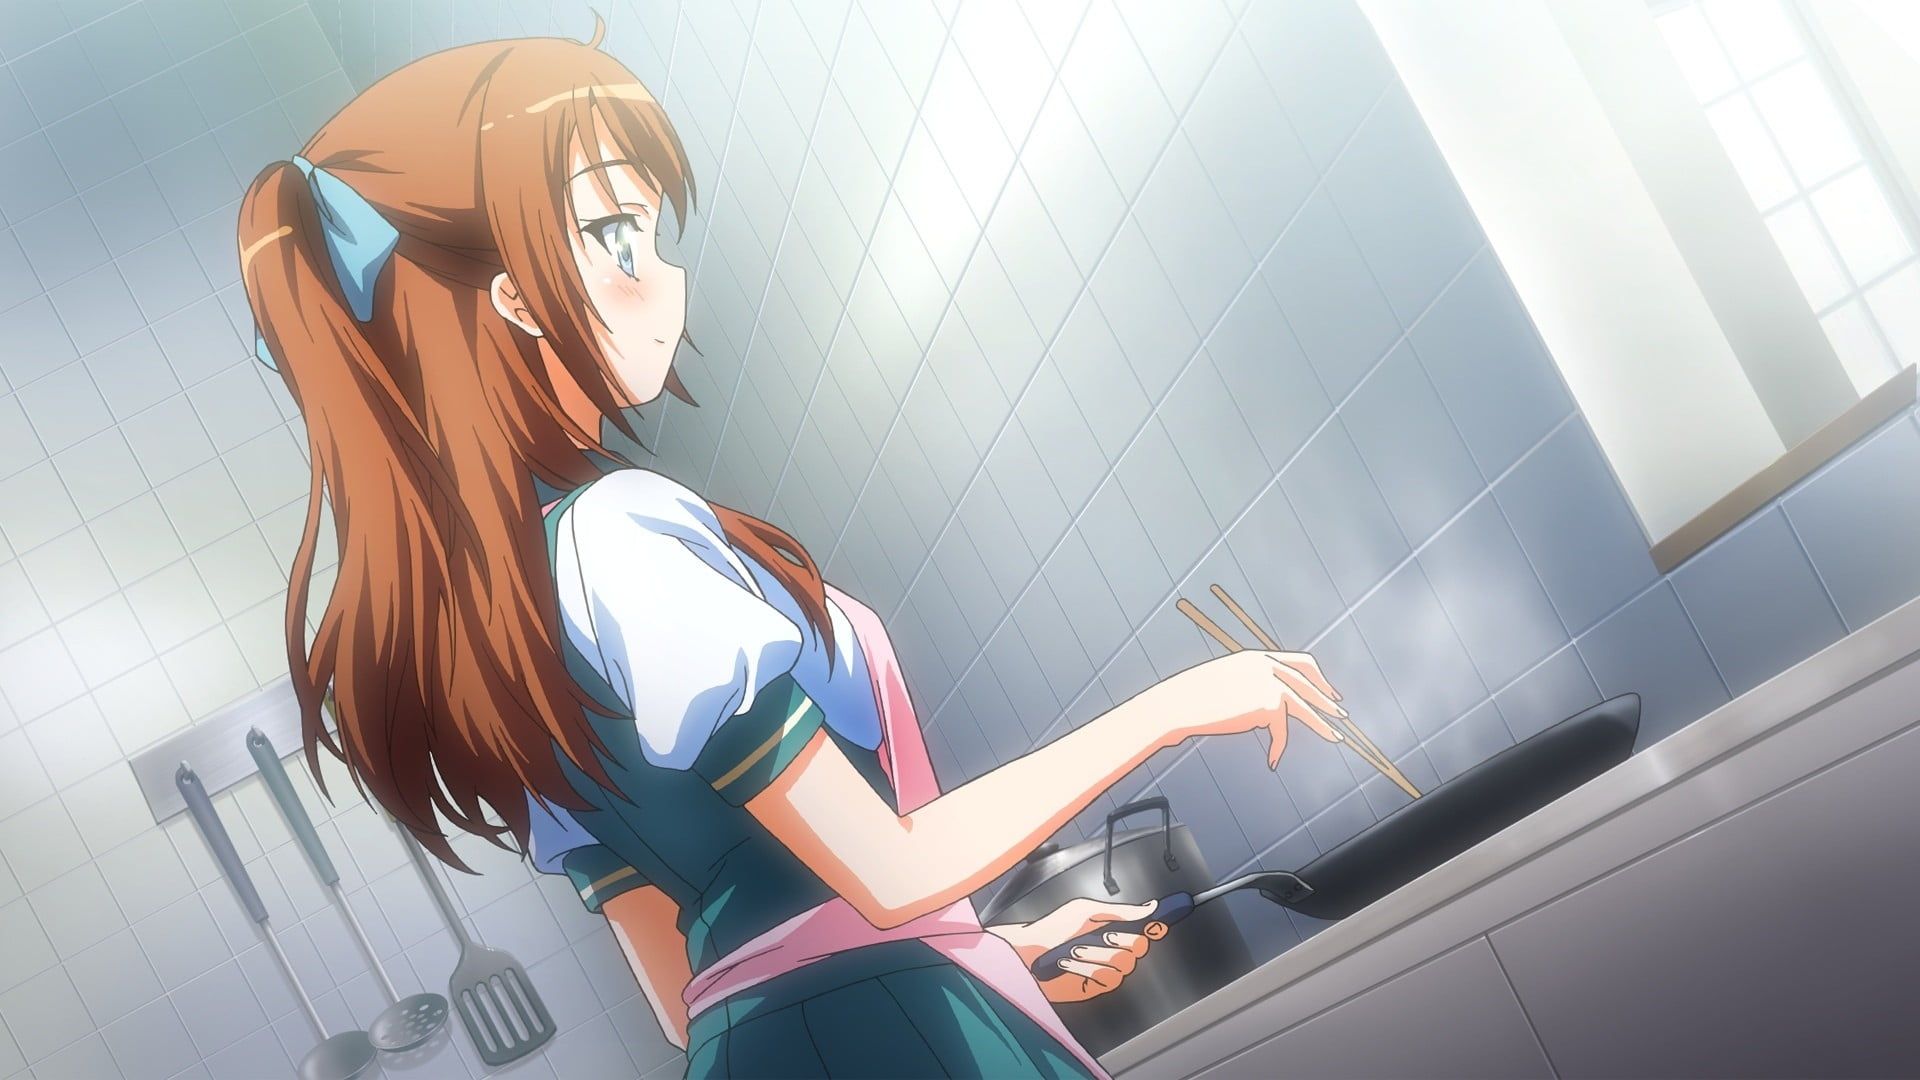 Female anime character in blue school uniform cooking on